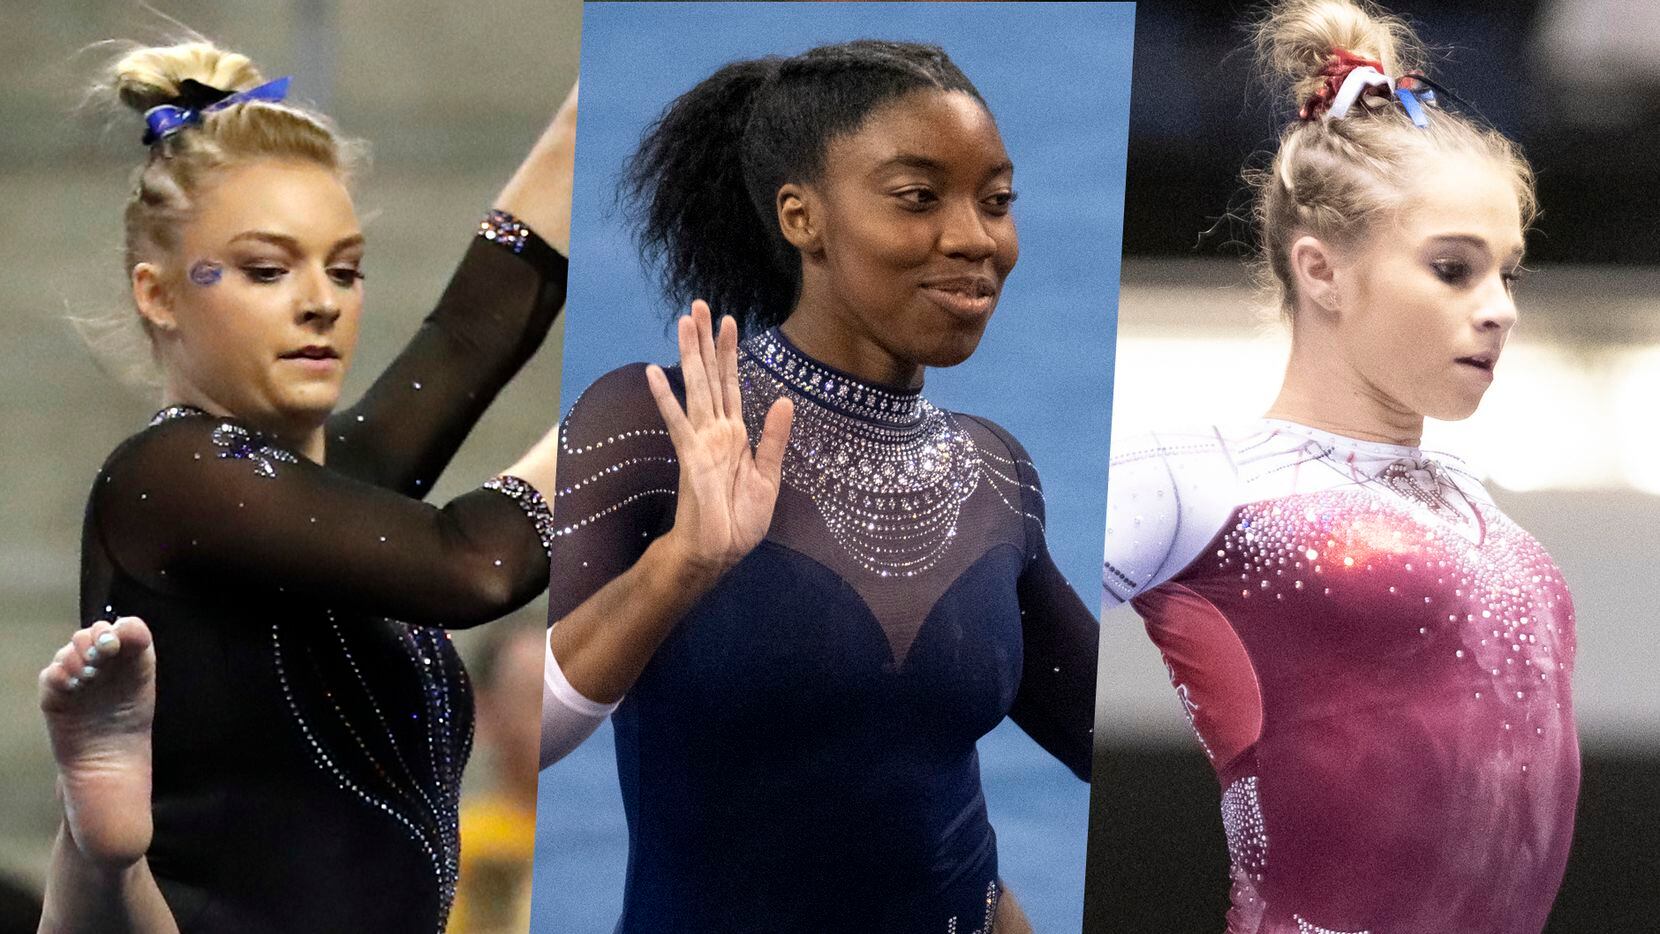 Florida's Alyssa Baumann (left), UCLA's Chae Campbell (center) and Oklahoma's Ragan Smith are three of several former North Texas gymnasts competing this weekend at the NCAA gymnastics championships in Fort Worth.